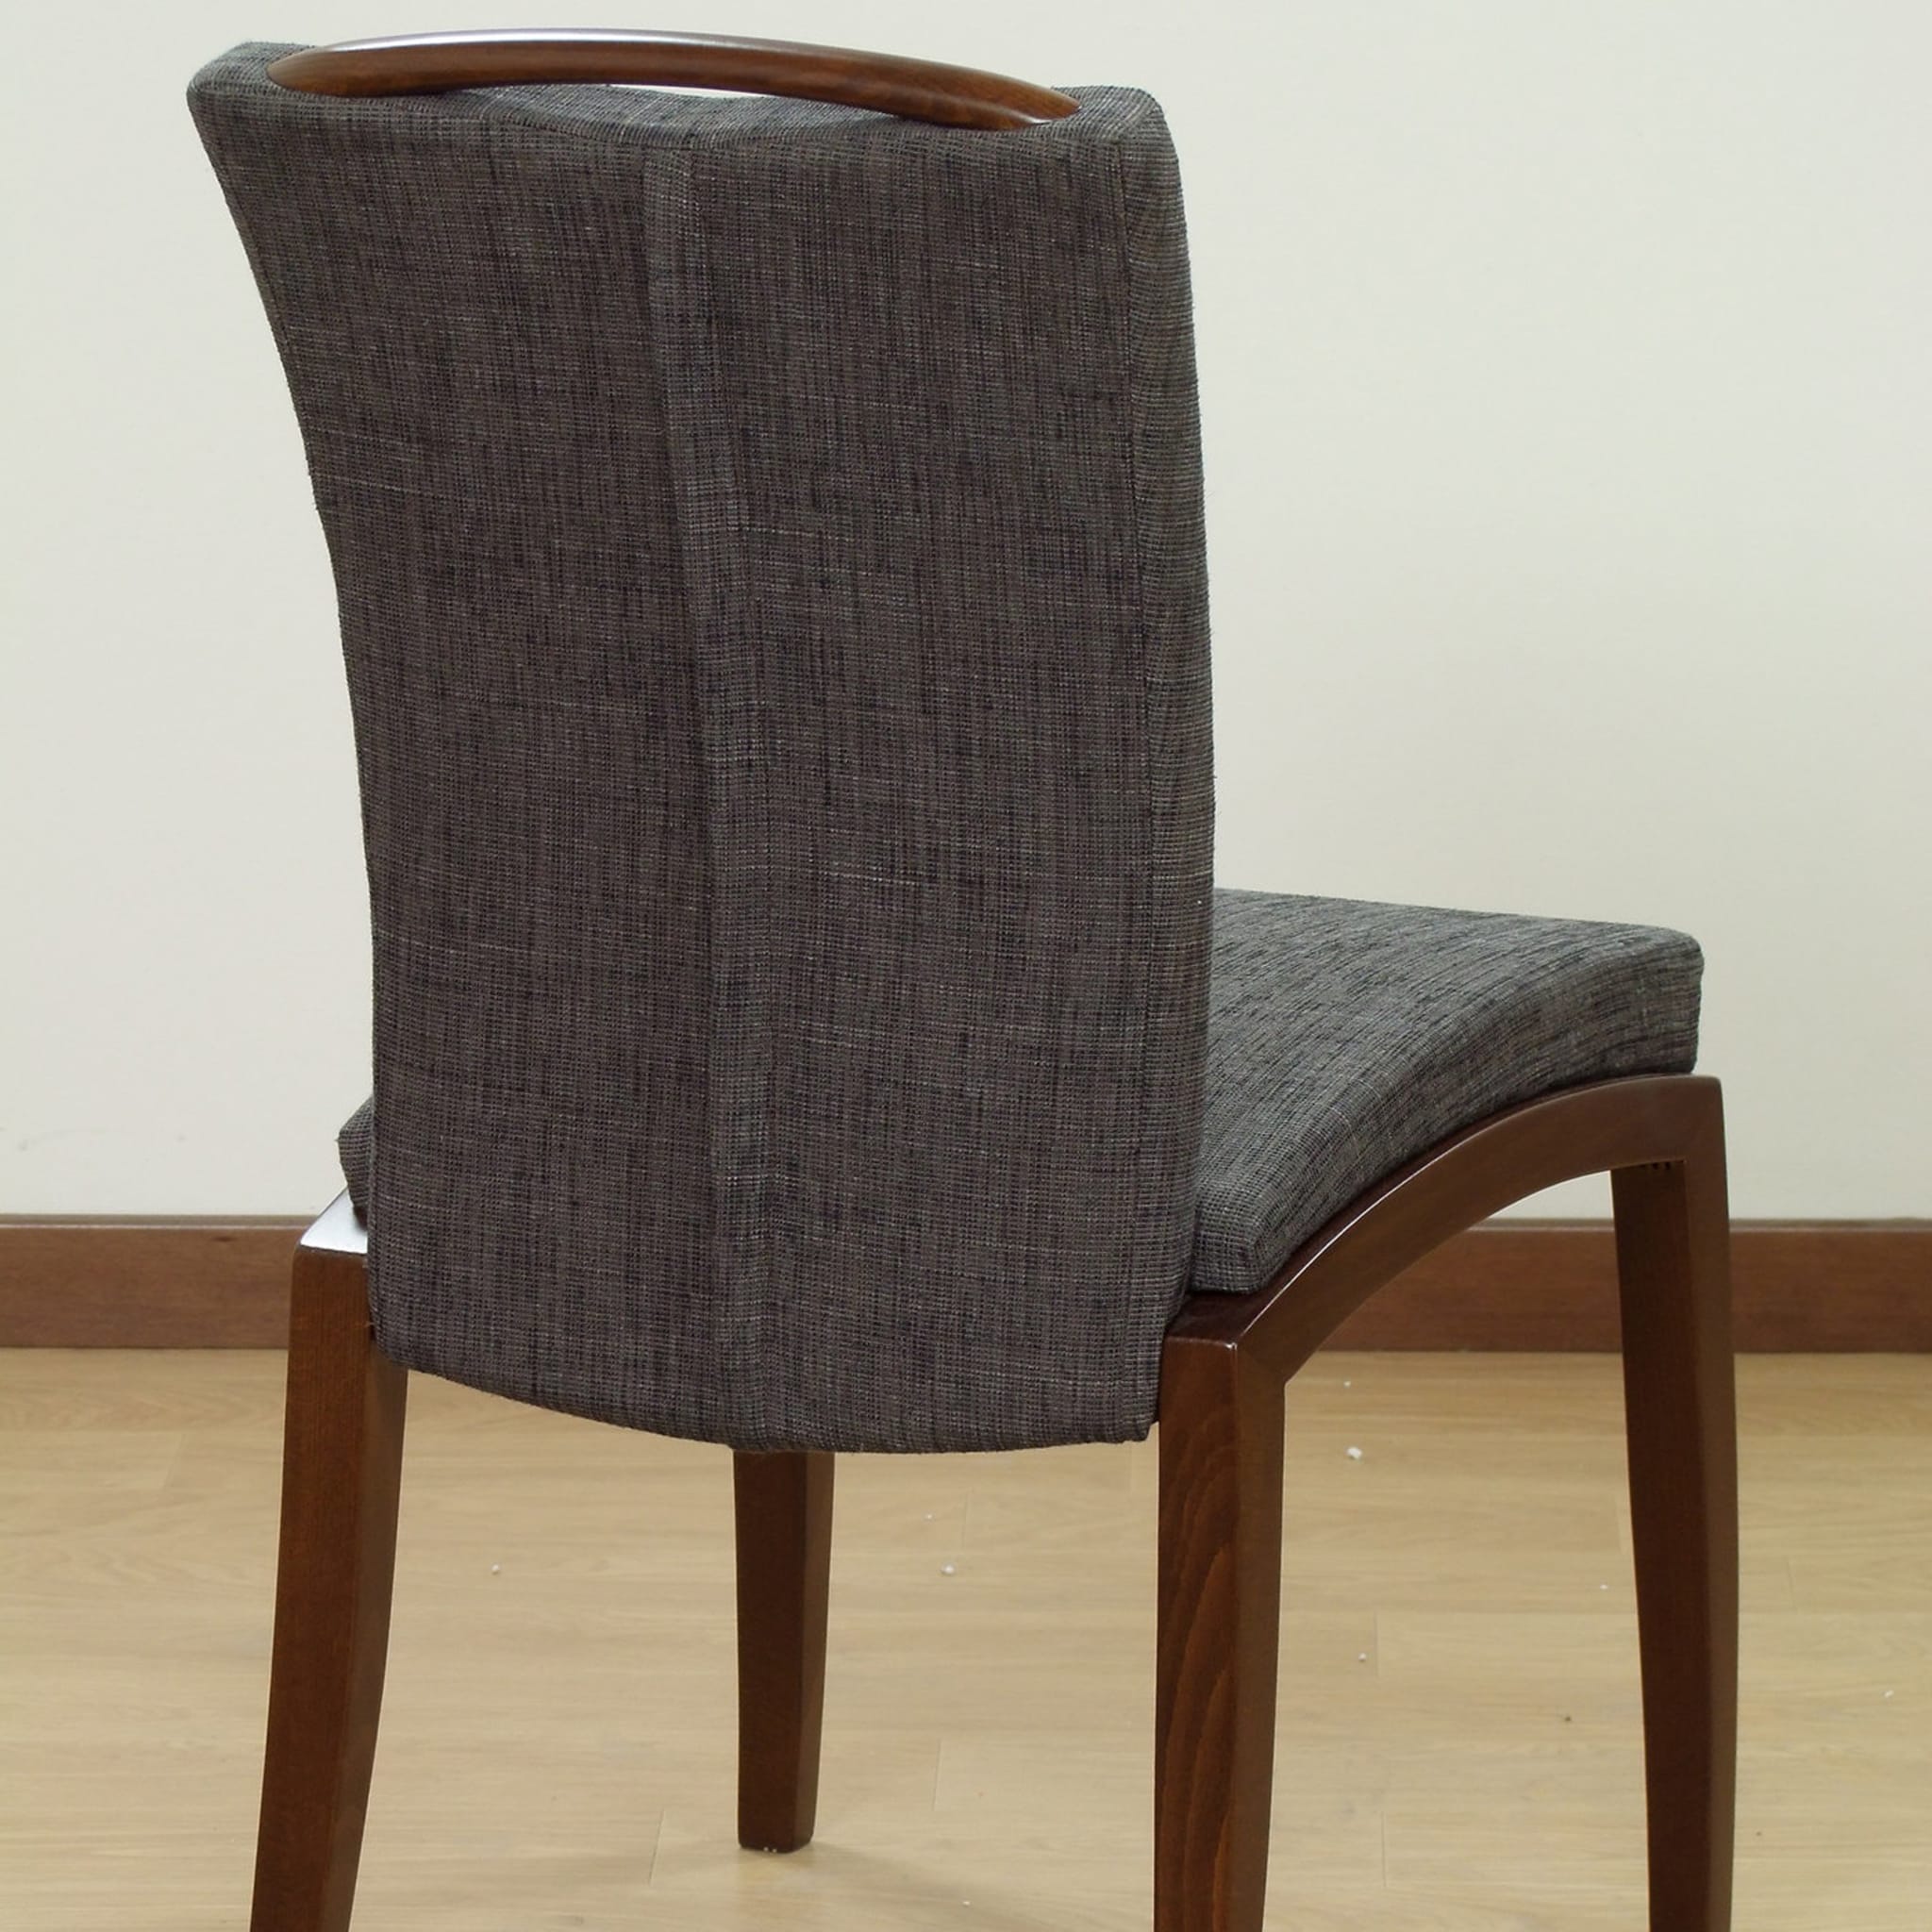 202/90 Set of 2 Chairs - Alternative view 3